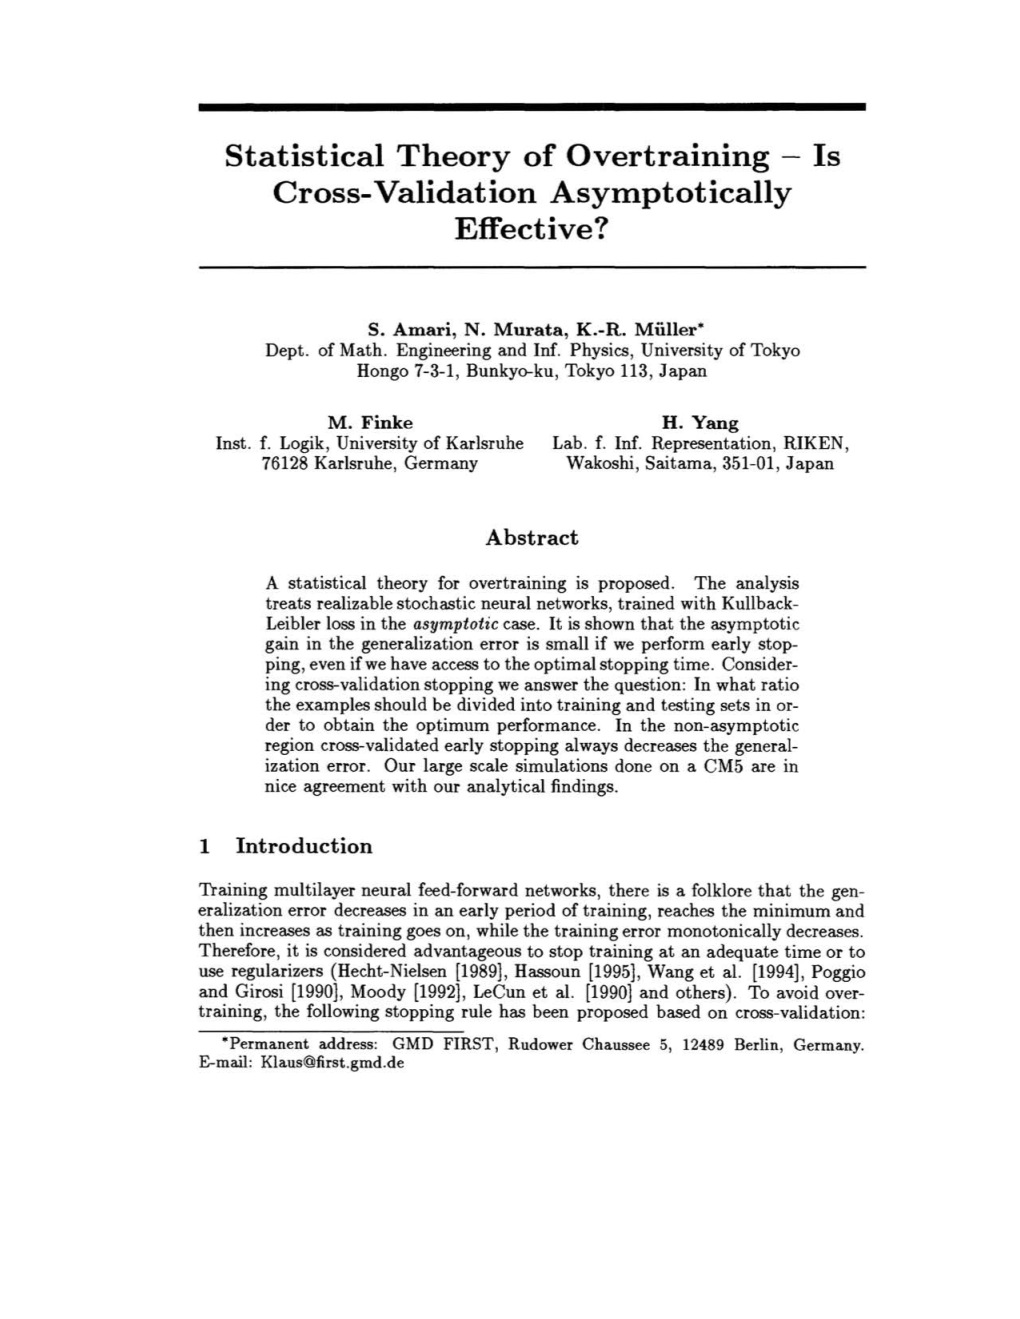 Statistical Theory of Overtraining - Is Cross-Validation Asymptotically Effective?